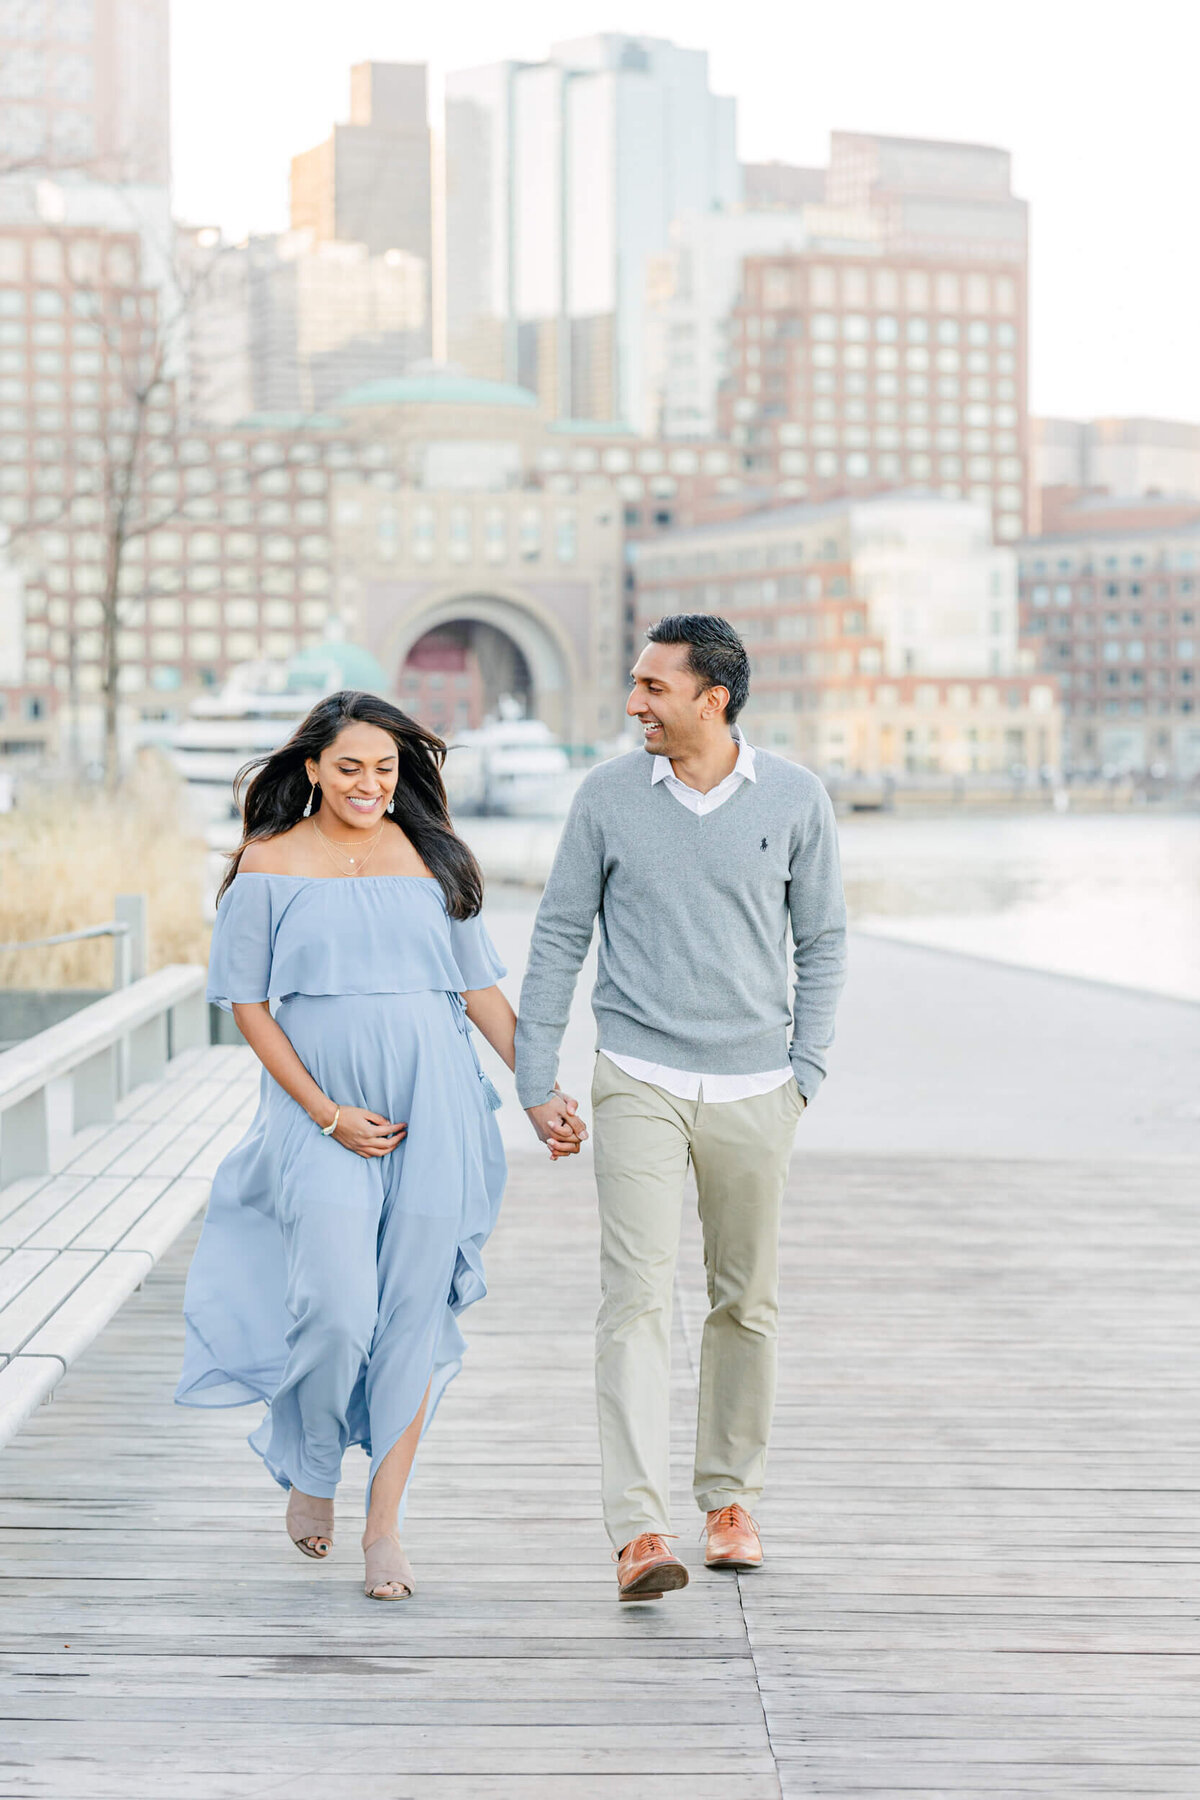 Pregnant woman and her husband hold hands and smile together as they walk in the Boston Seaport district